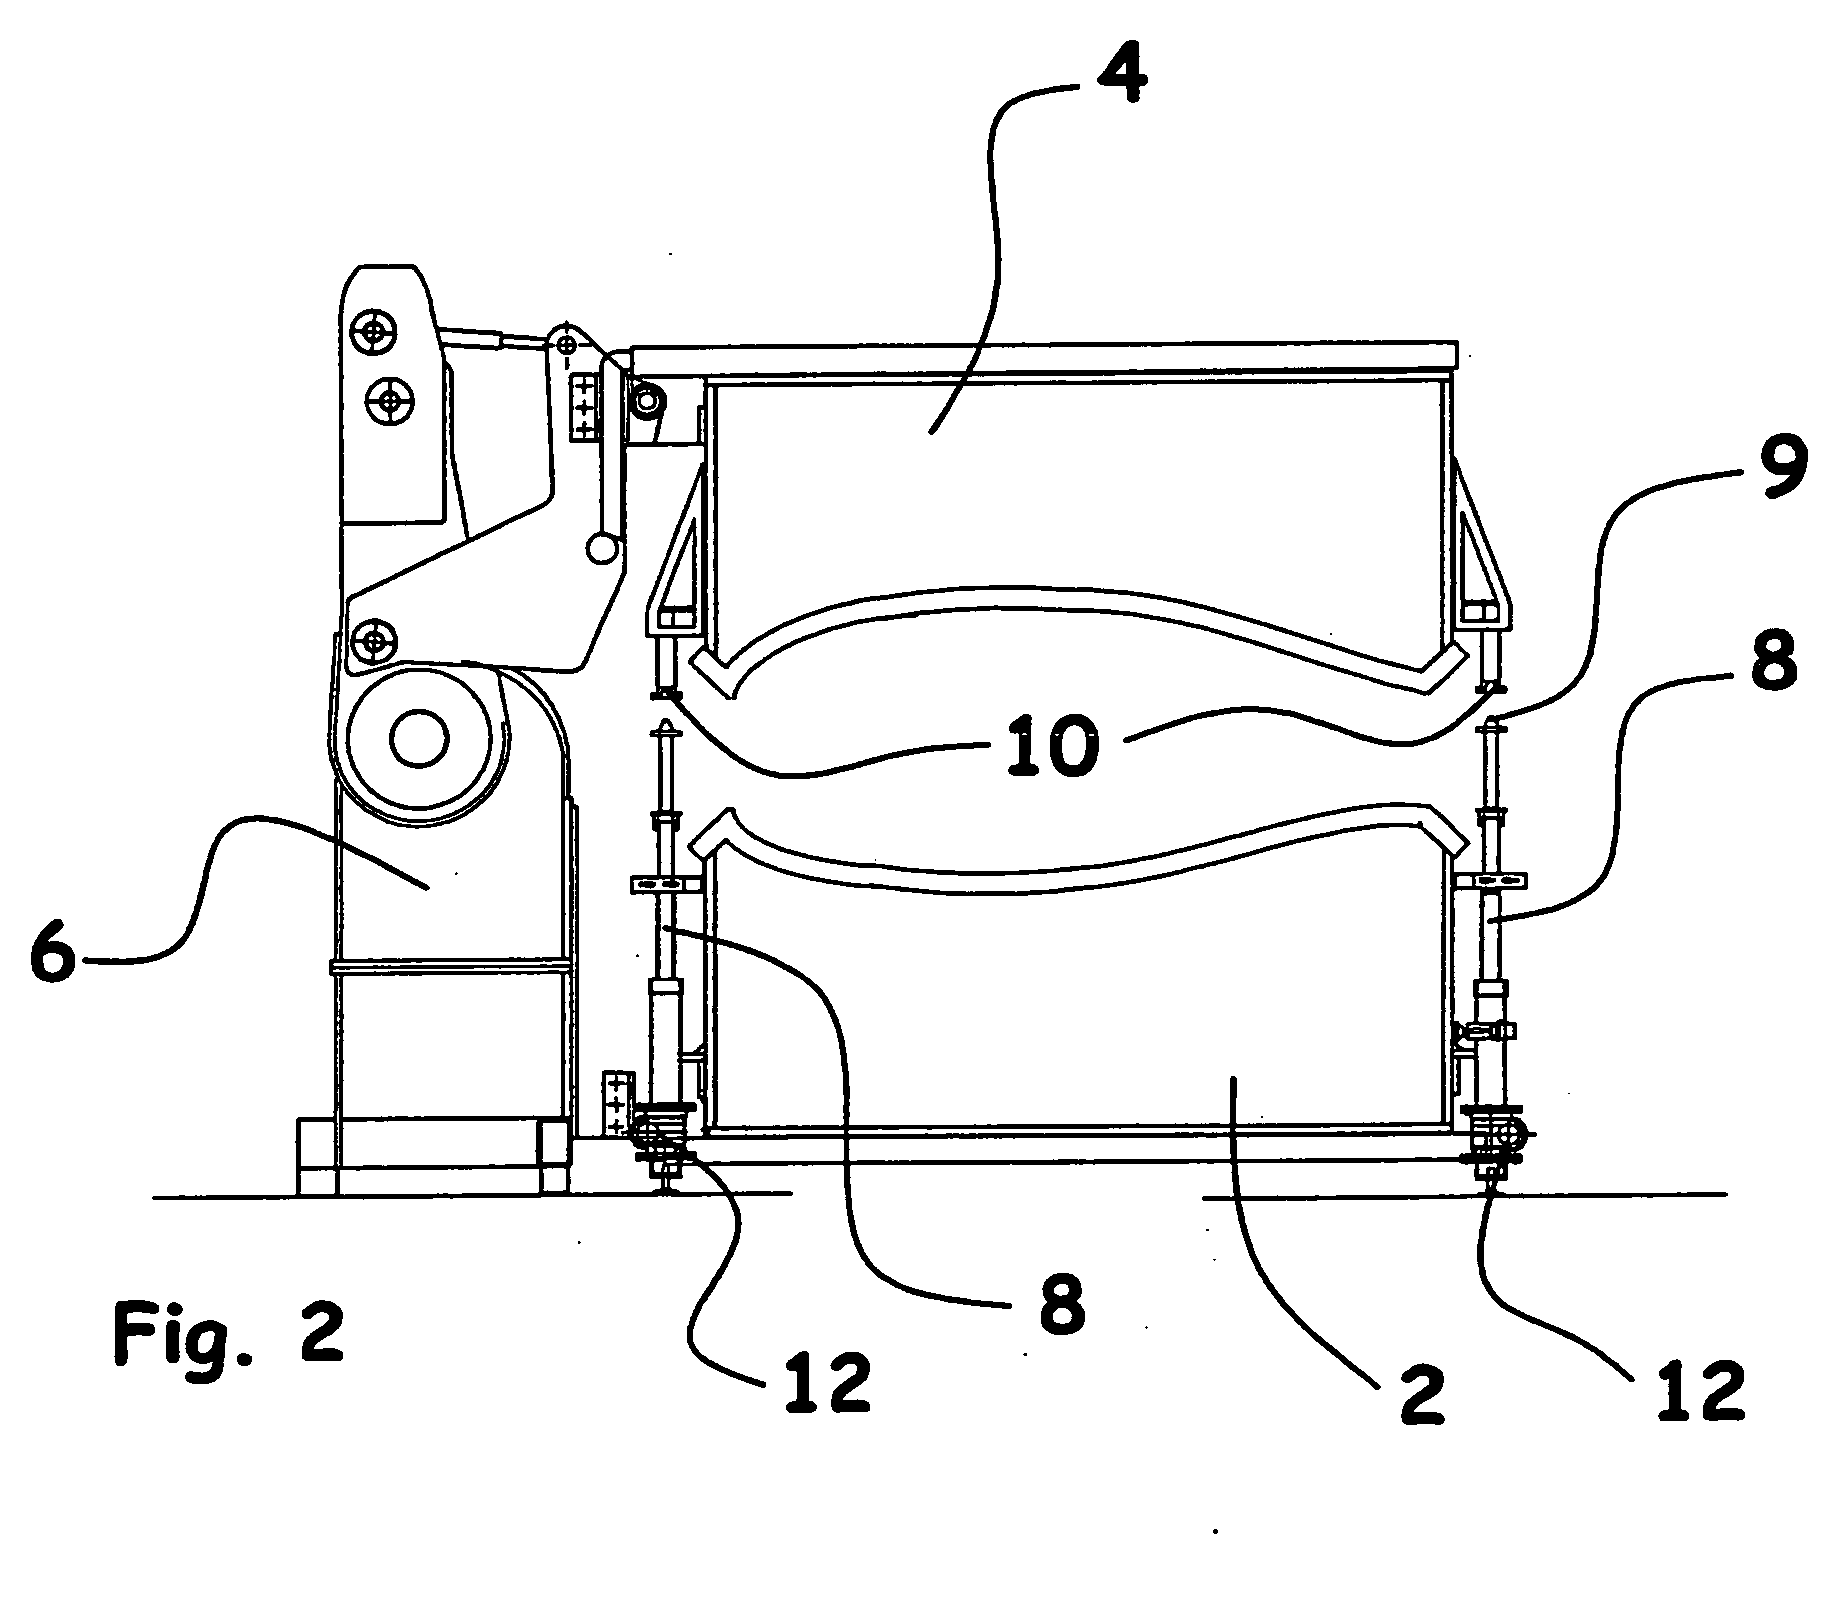 Mold assembly with closure mechanism